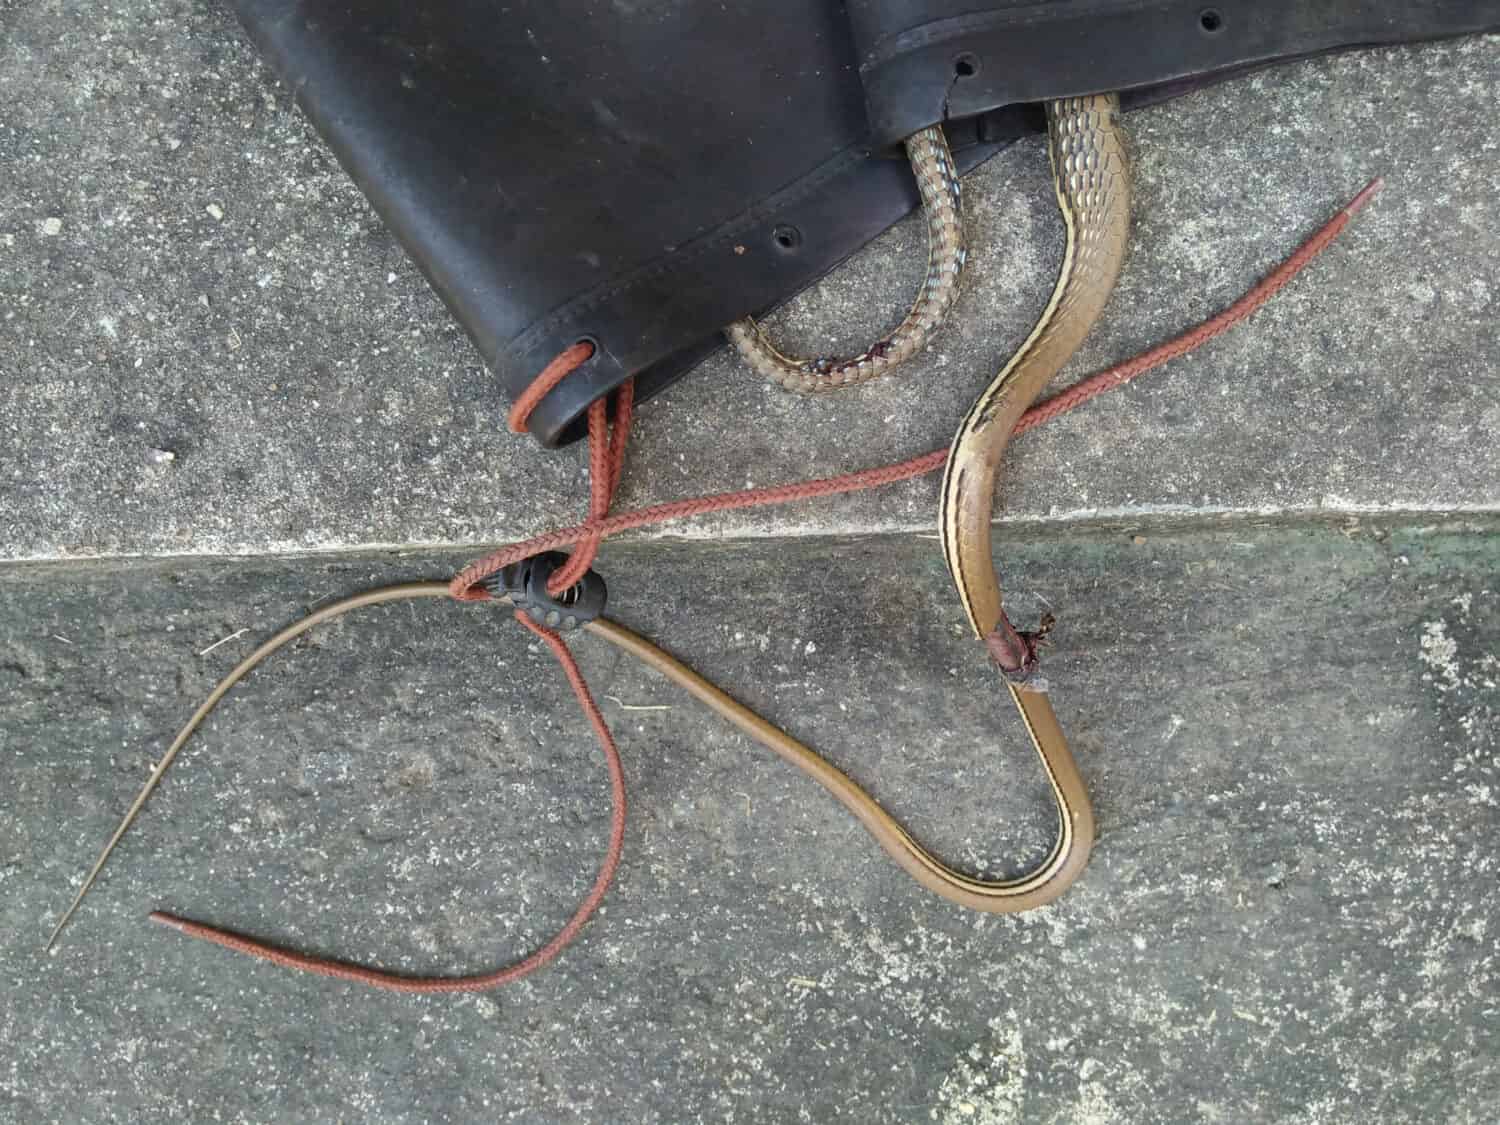 Snake hides in the shoes.